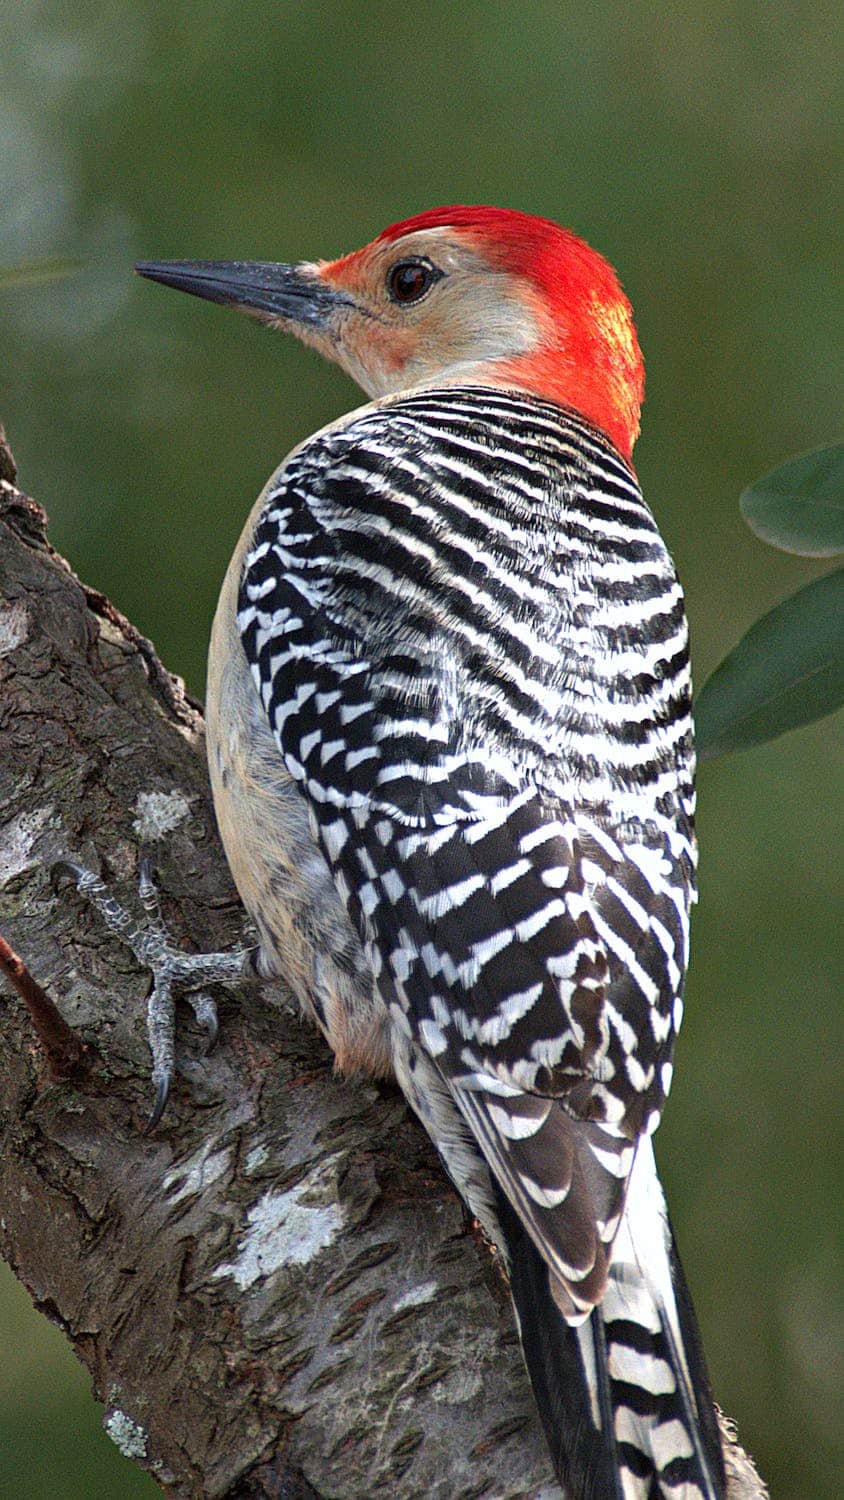 A woodpecker with red head and black & white body sat on a tree branch